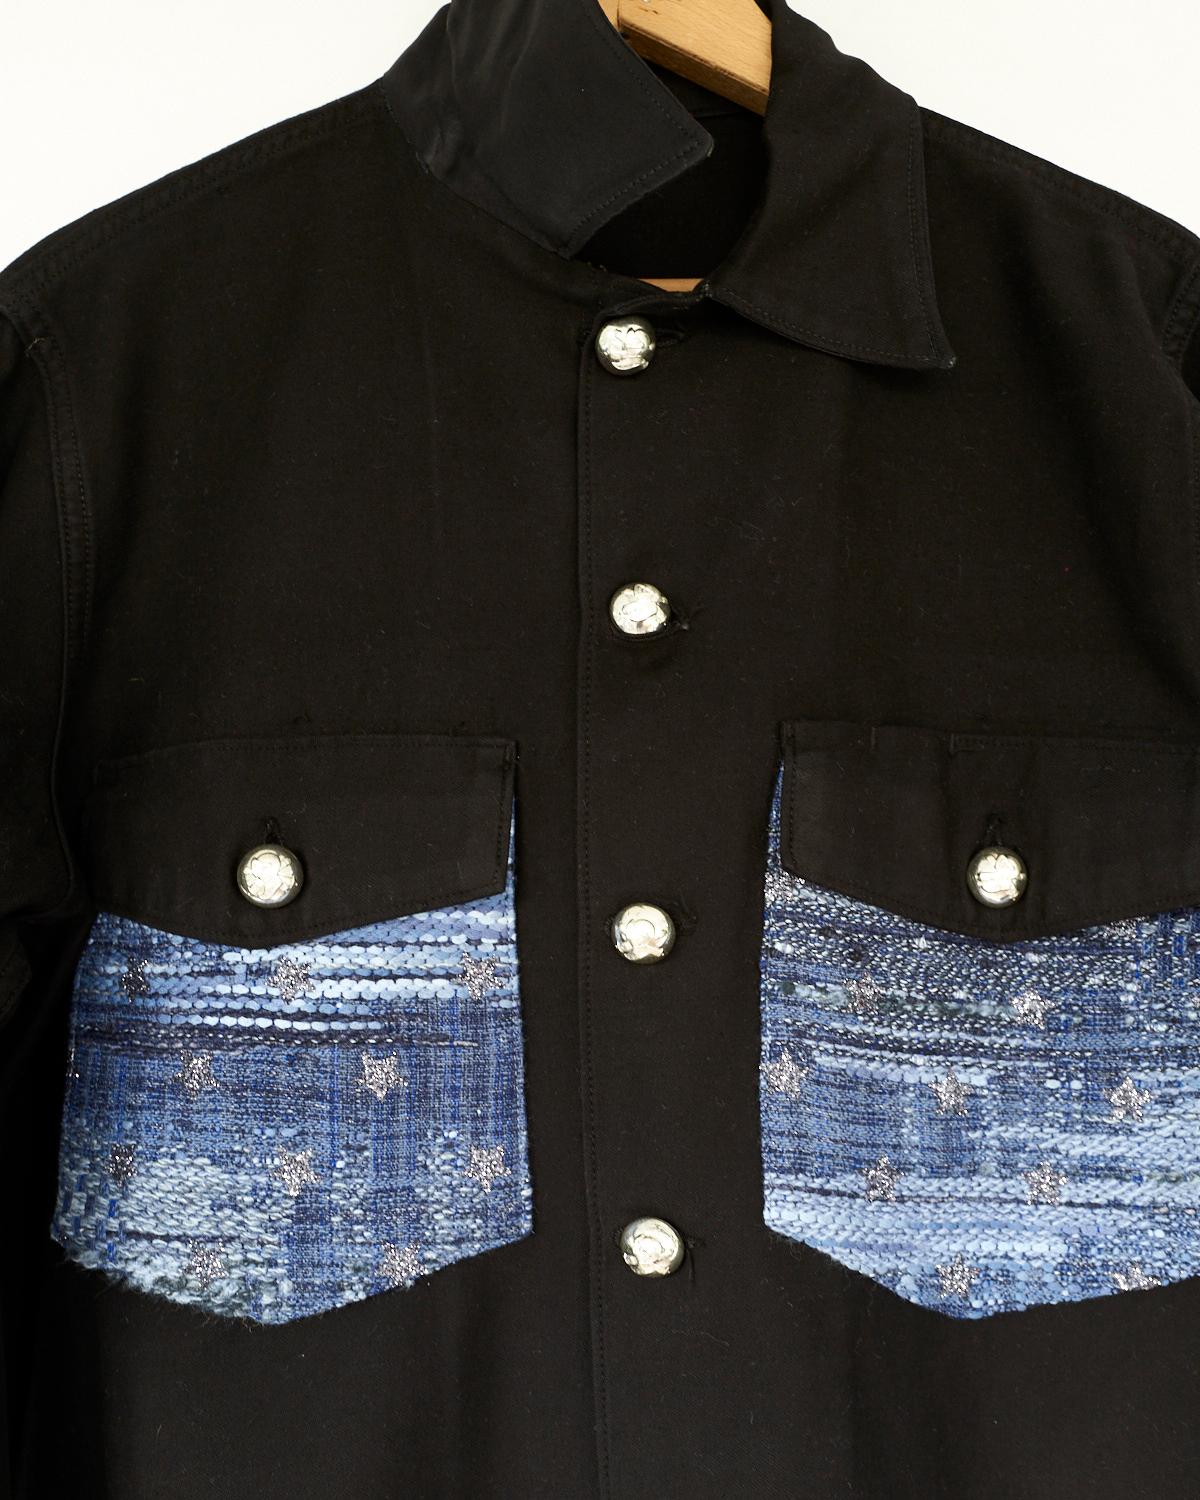 Embellished Oversize Re- Purposed Military Jacket in Black with Blue Glitter Star Design Tweed and Silver Button Open Elbow 
Brand: J Dauphin
Size: S/M
Sustainable Luxury, Collectible Vintage Re- Purposed

Our one of a kind, zero waste, up-cycled